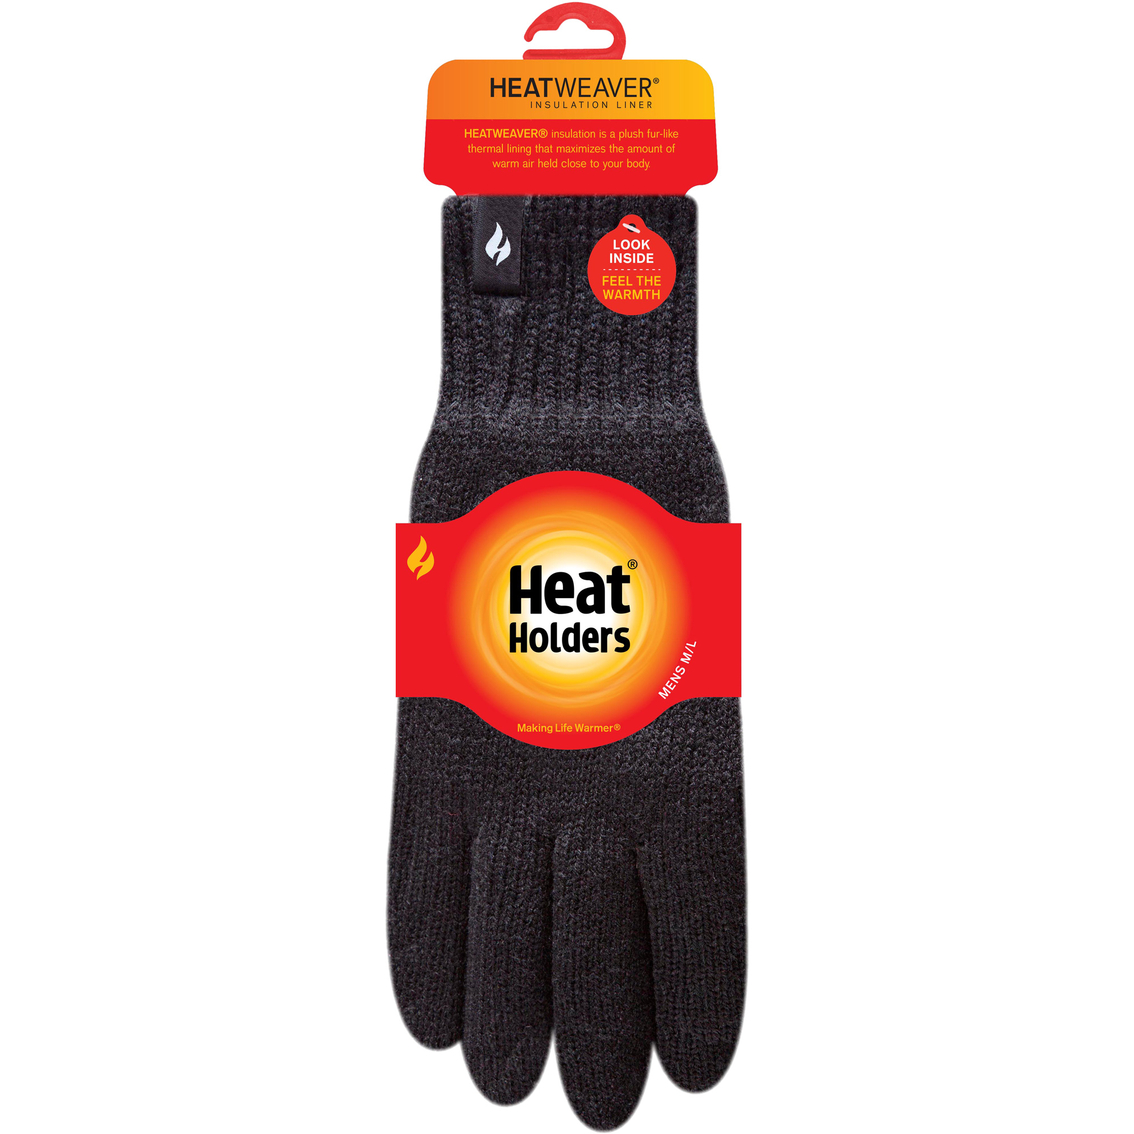 Heat Holders Knit Gloves - Image 2 of 3